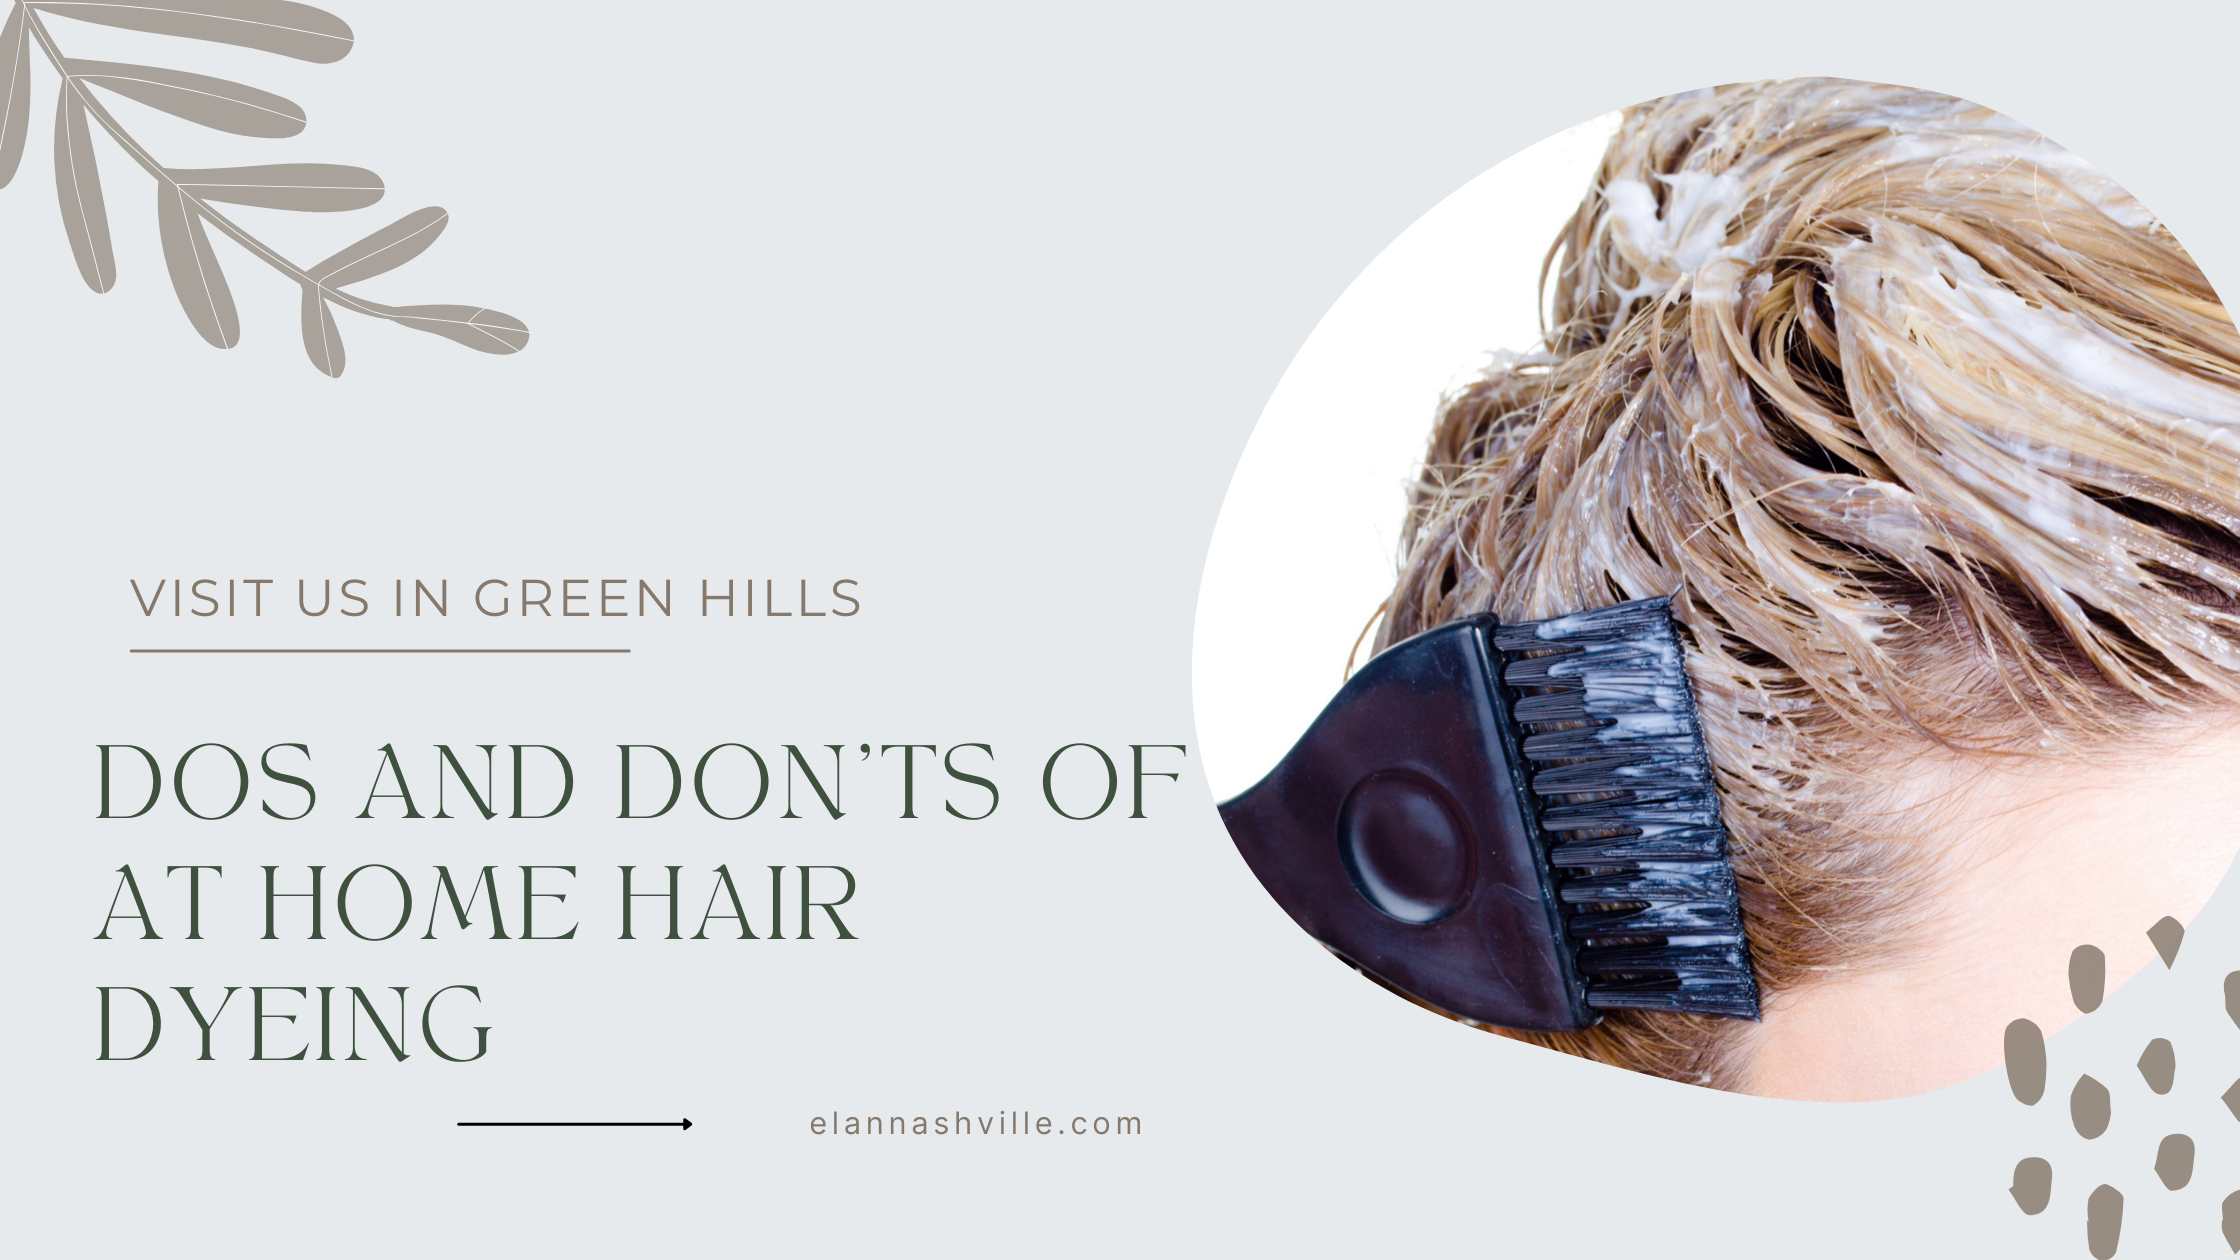 5. "The Dos and Don'ts of Dyeing Your Hair Blonde" - wide 7